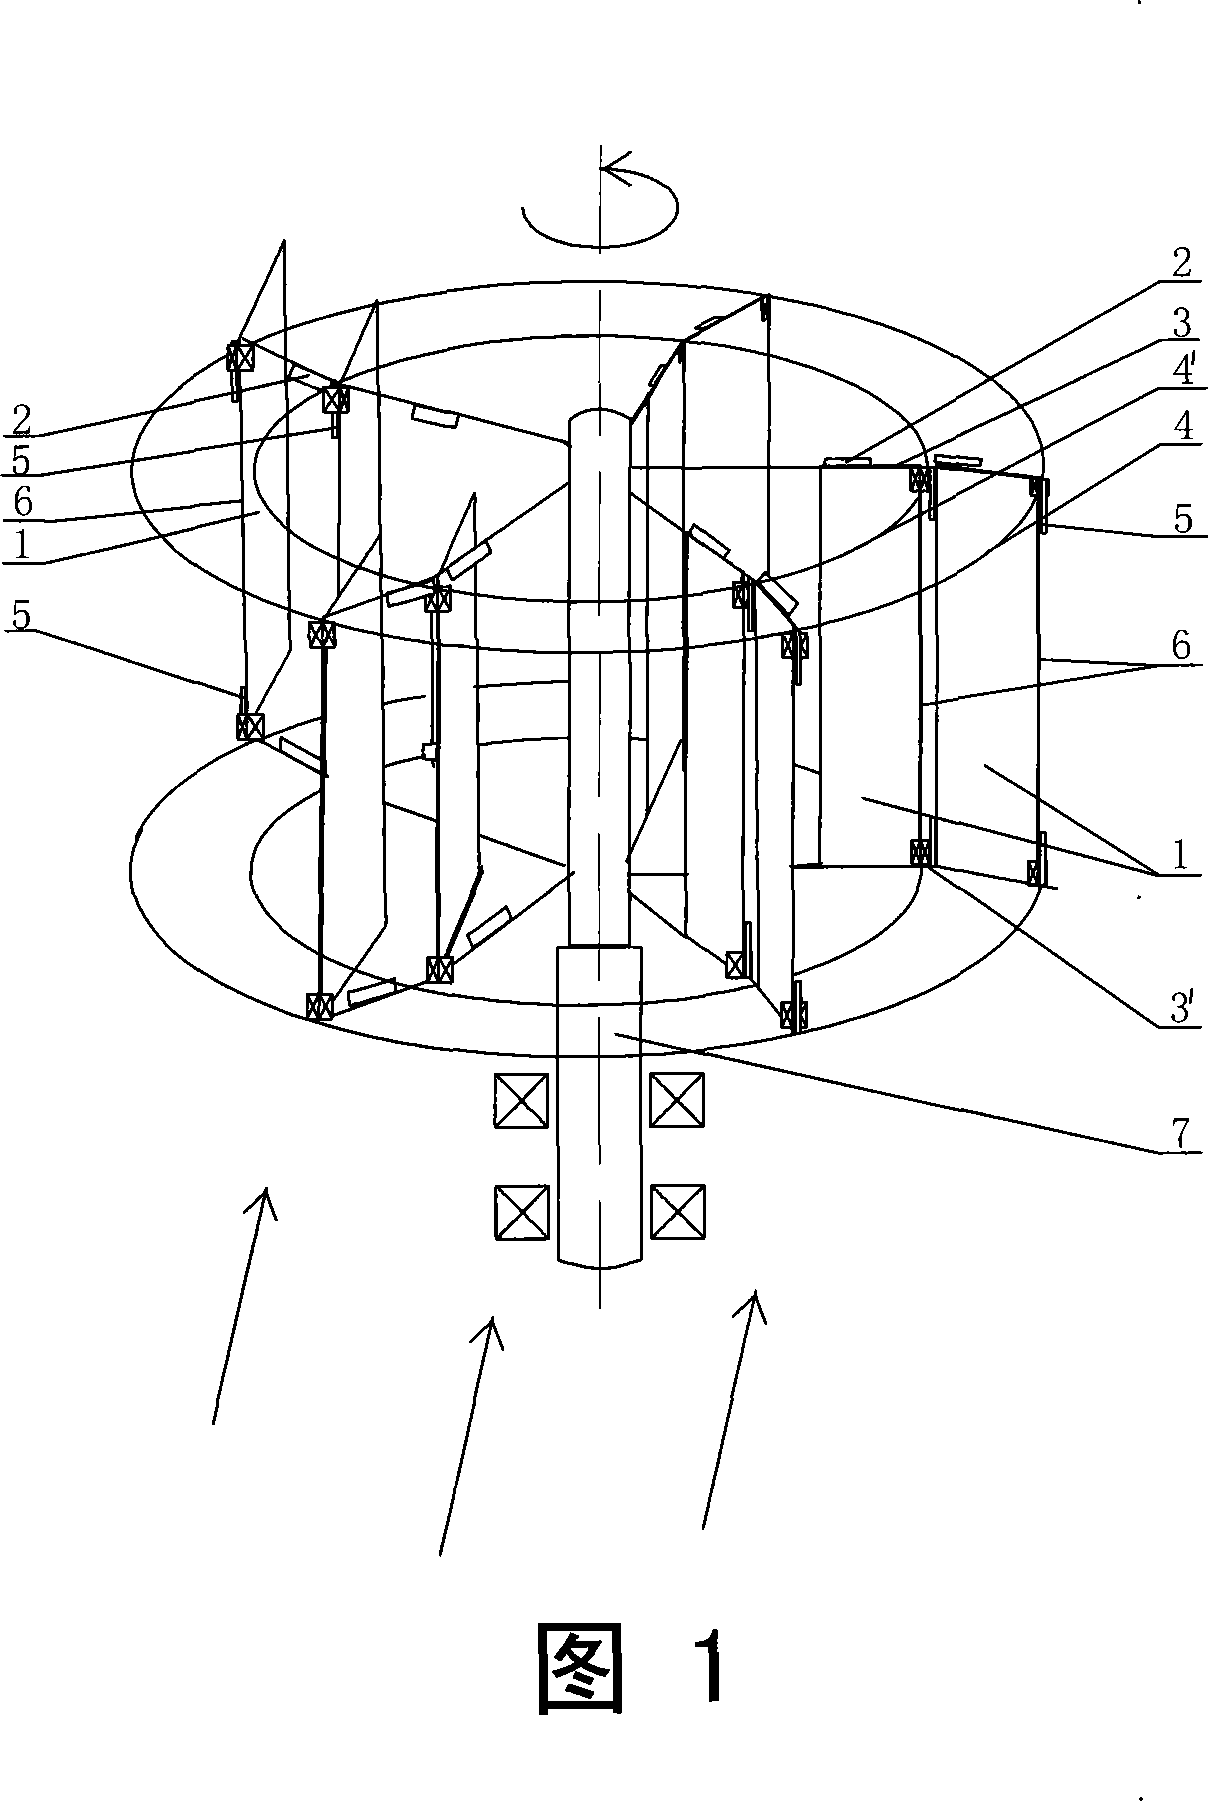 One-arm multi-leaf vertical axis wind mill